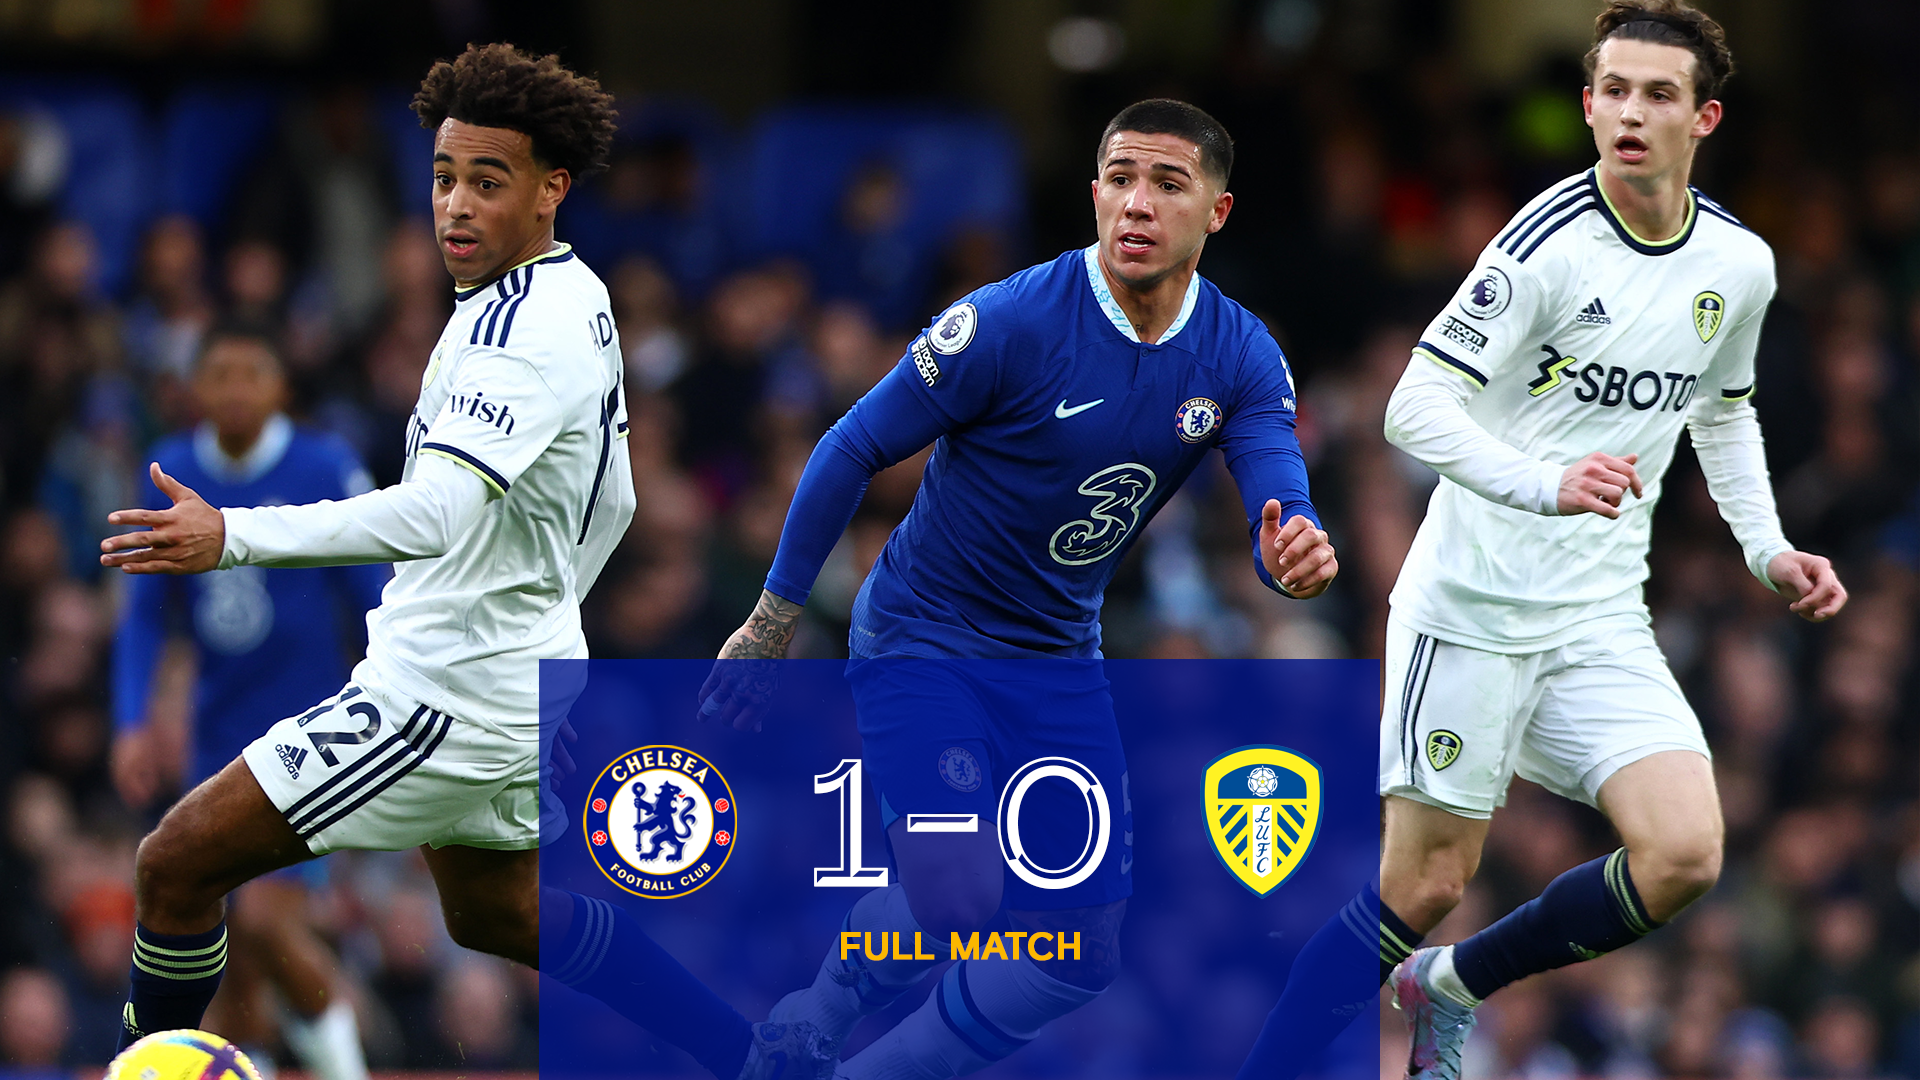 Full Match Chelsea 1-0 Leeds Video Official Site Chelsea Football Club